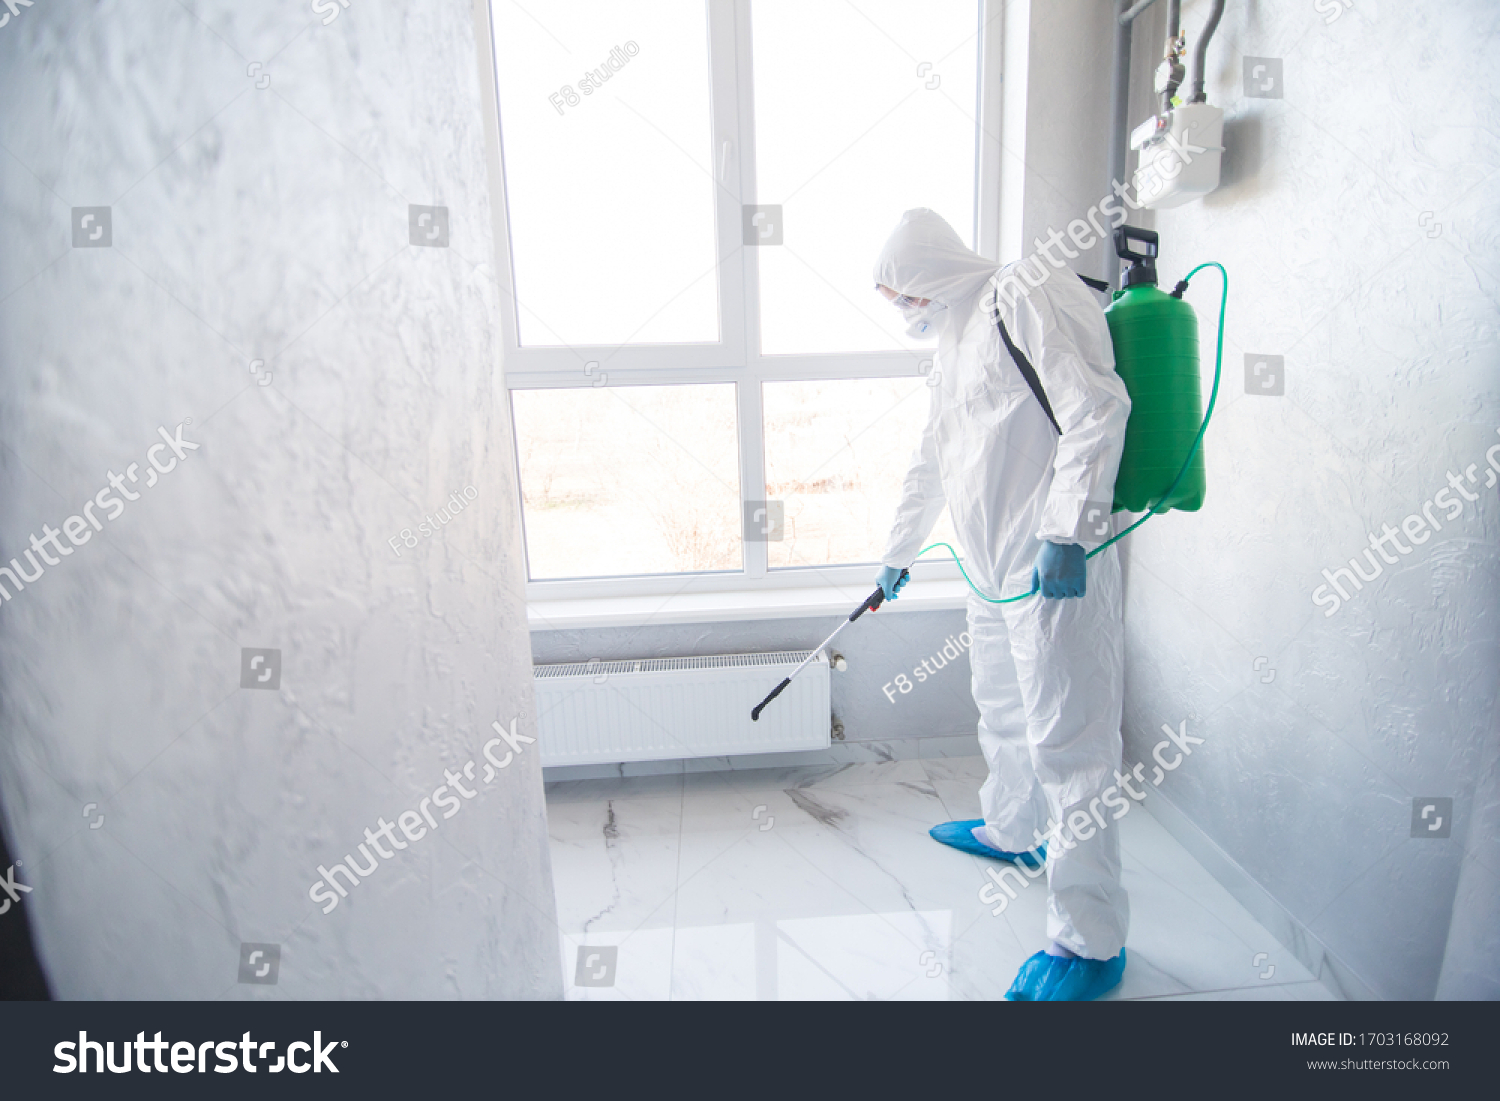 Coronavirus Pandemic. A disinfector in a protective suit and mask sprays disinfectants in house or office. Protection agsinst COVID-19 disease. Prevention of spreding pneumonia virus with surfaces. #1703168092